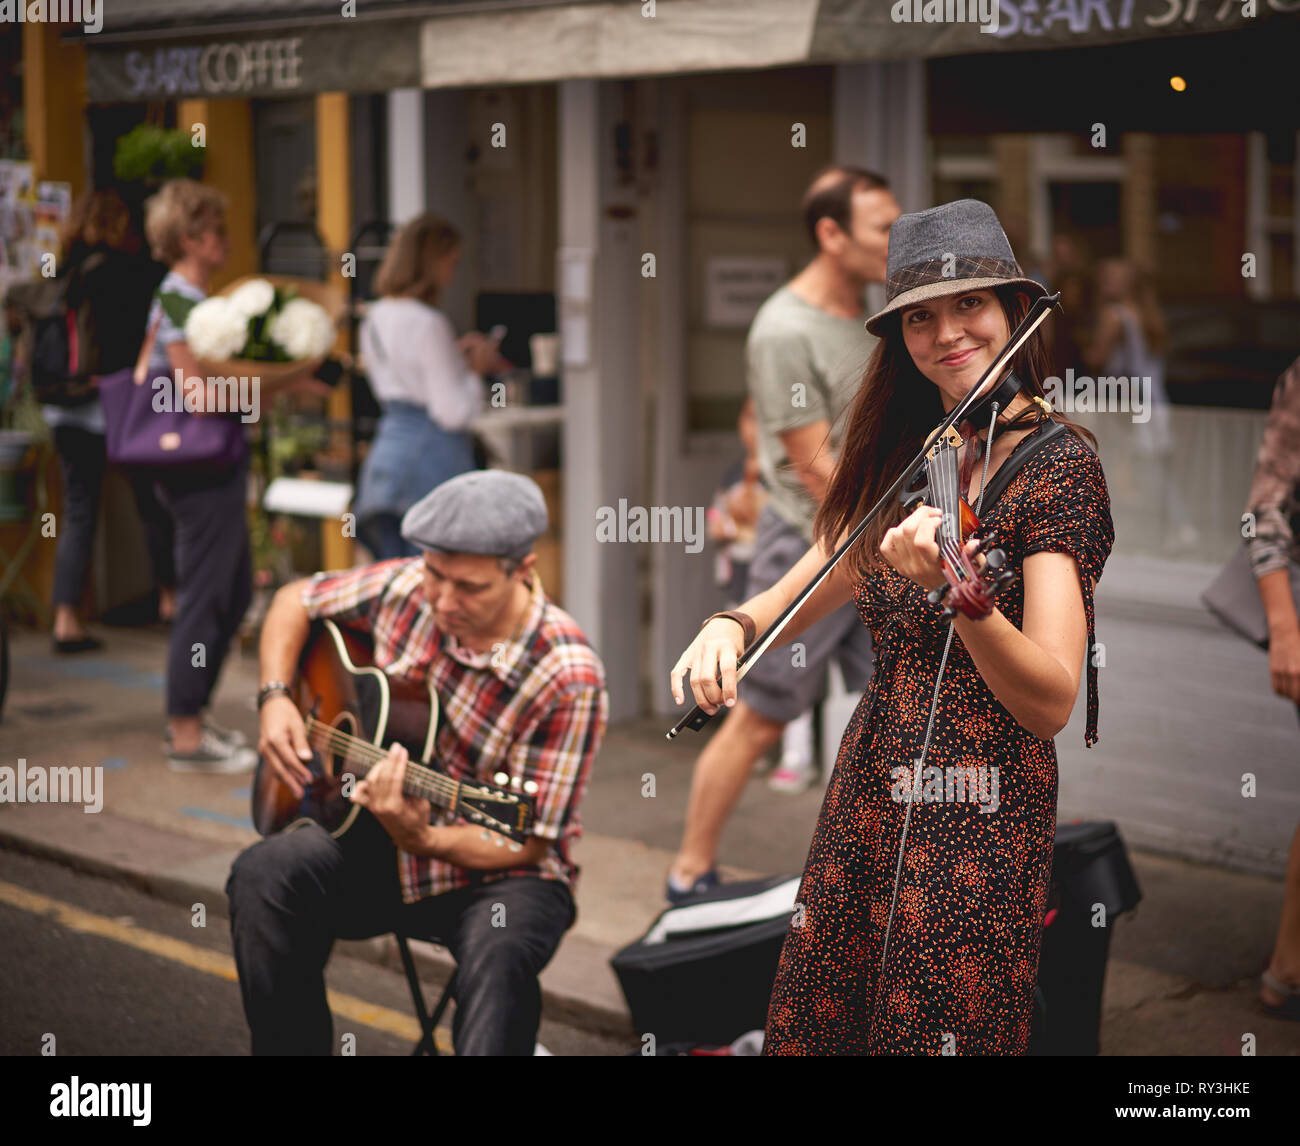 London, UK - August, 2018. A guitarist and a violinist performing at the Columbia Road Flower Market. Stock Photo